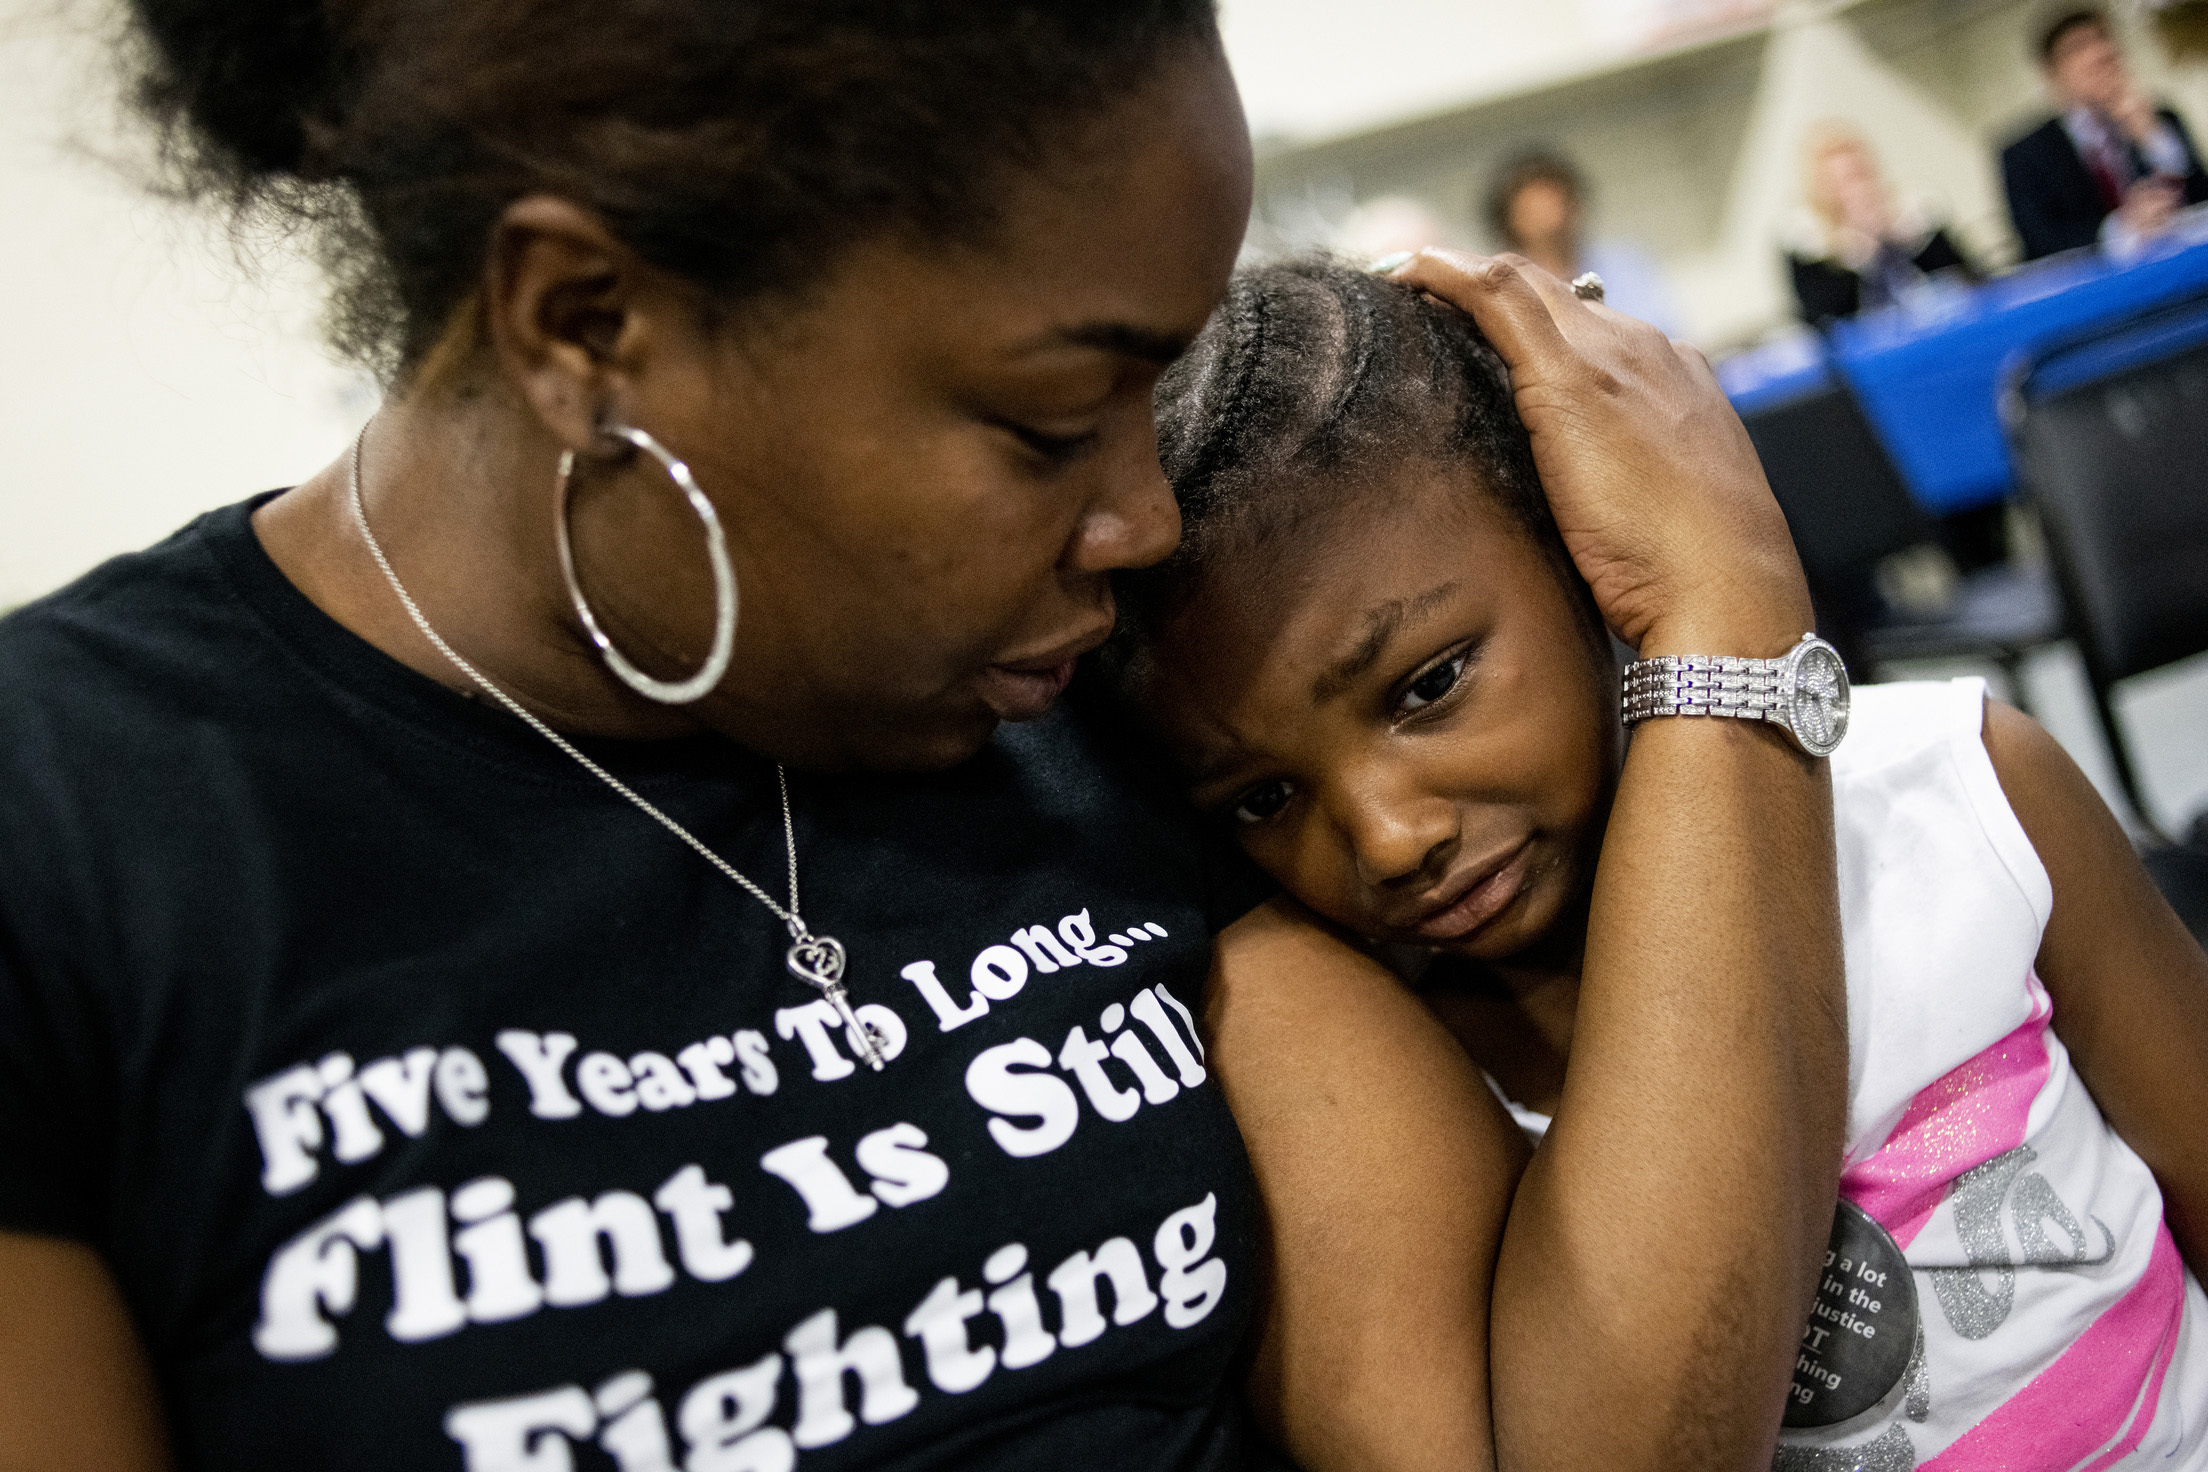 PHOTO: Flint resident Ariana Hawk consoles her daughter Aliana, 4, near the end of a two-hour community meeting with Flint water prosecutors at UAW Local 659, June 28, 2019, in Flint, Michigan. 